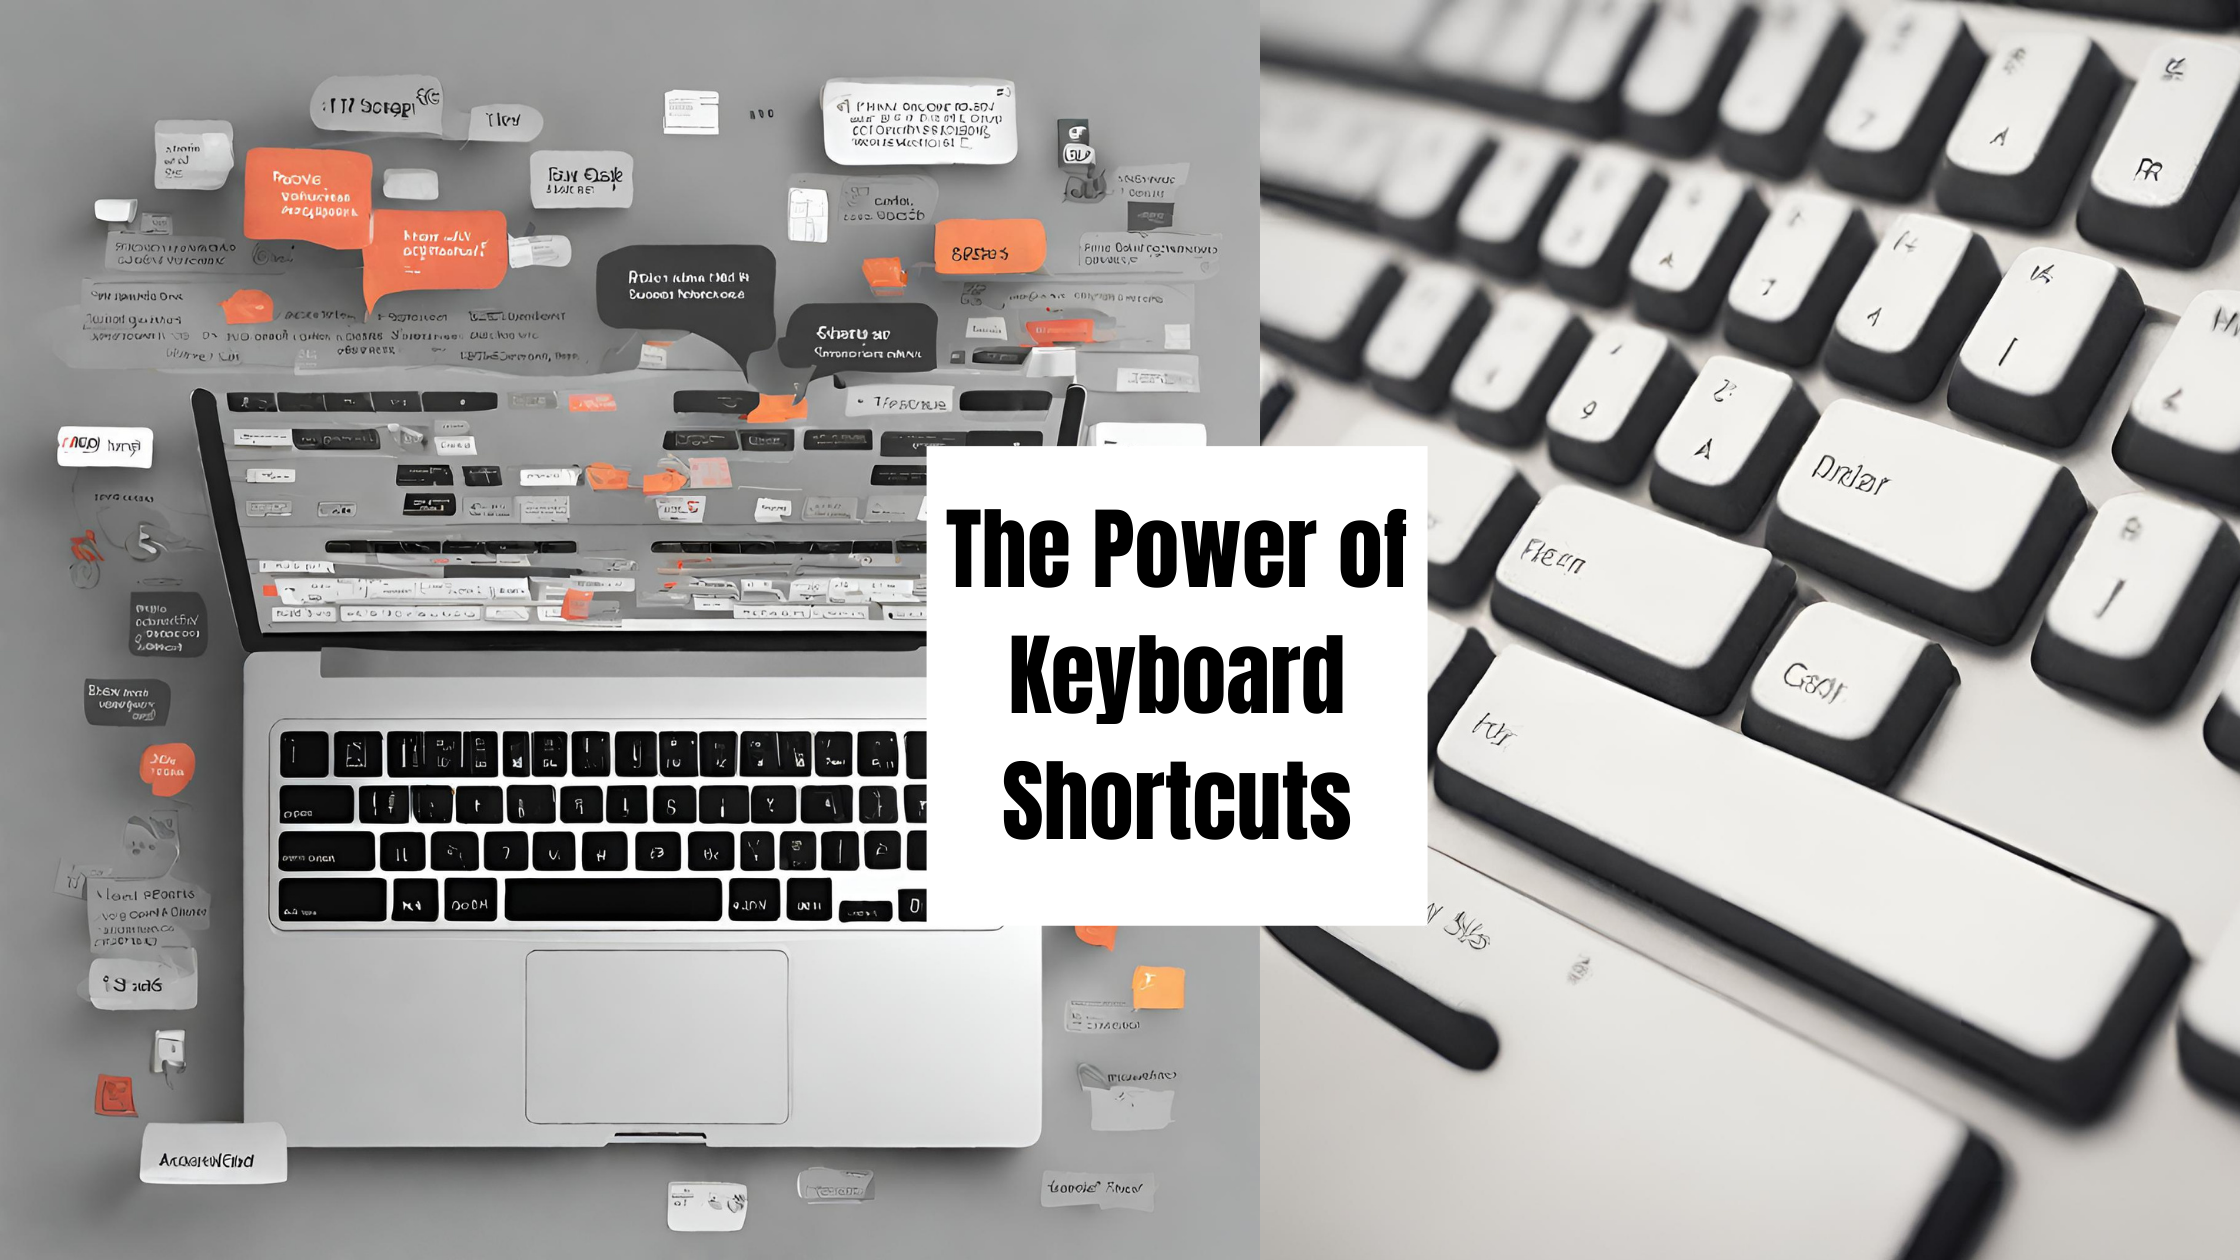 The Power of Keyboard Shortcuts